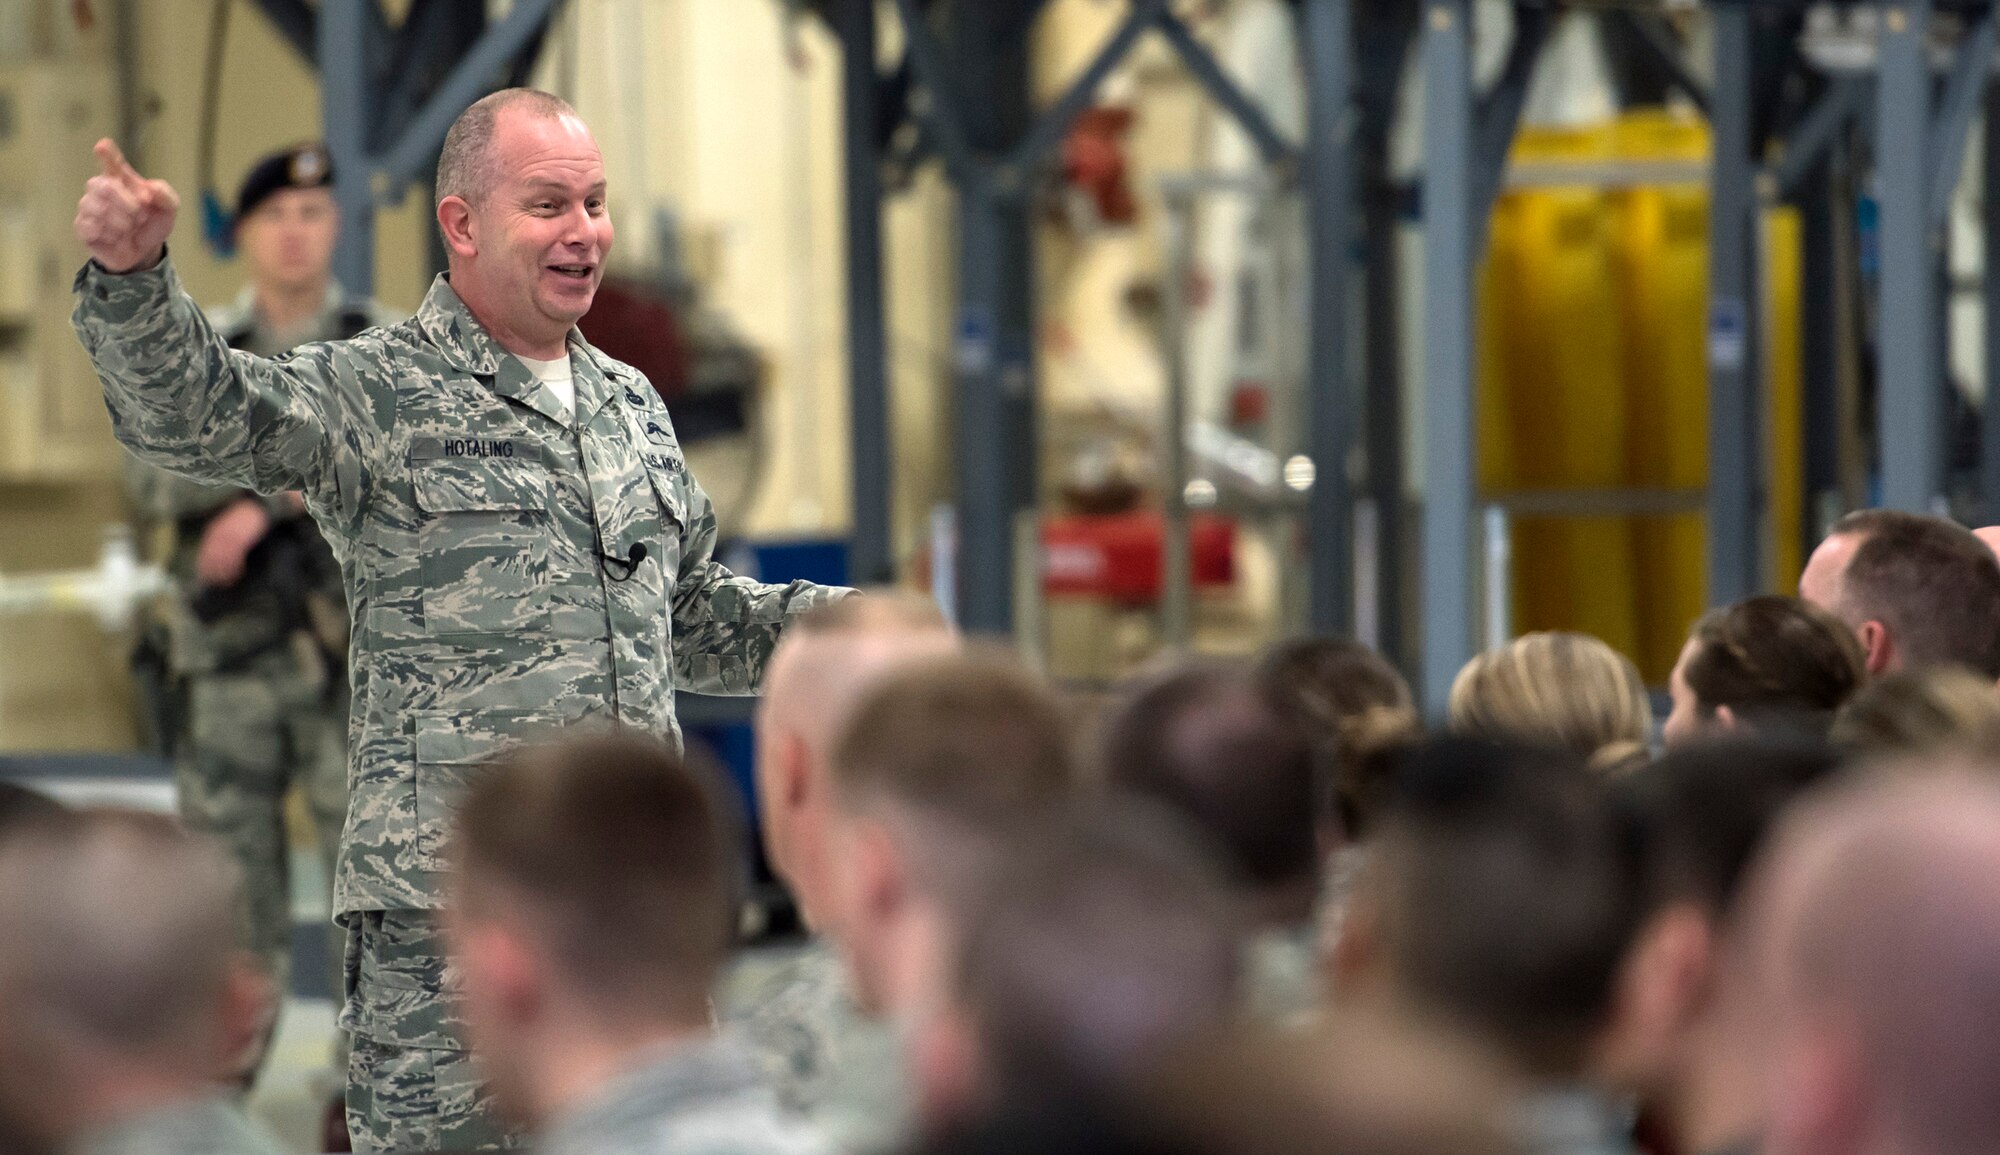 U.S. Air Force Chief Master Sgt. James W. Hotaling, the command chief of the Air National Guard, speaks with the Illinois Air National Guard 182nd Airlift Wing’s enlisted corps in Peoria, Ill., March 4, 2016. Hotaling visited the base to discuss renewing the commitment to the profession of arms, the health of the force and embracing accomplishments. (U.S. Air National Guard photo by Staff Sgt. Lealan Buehrer)